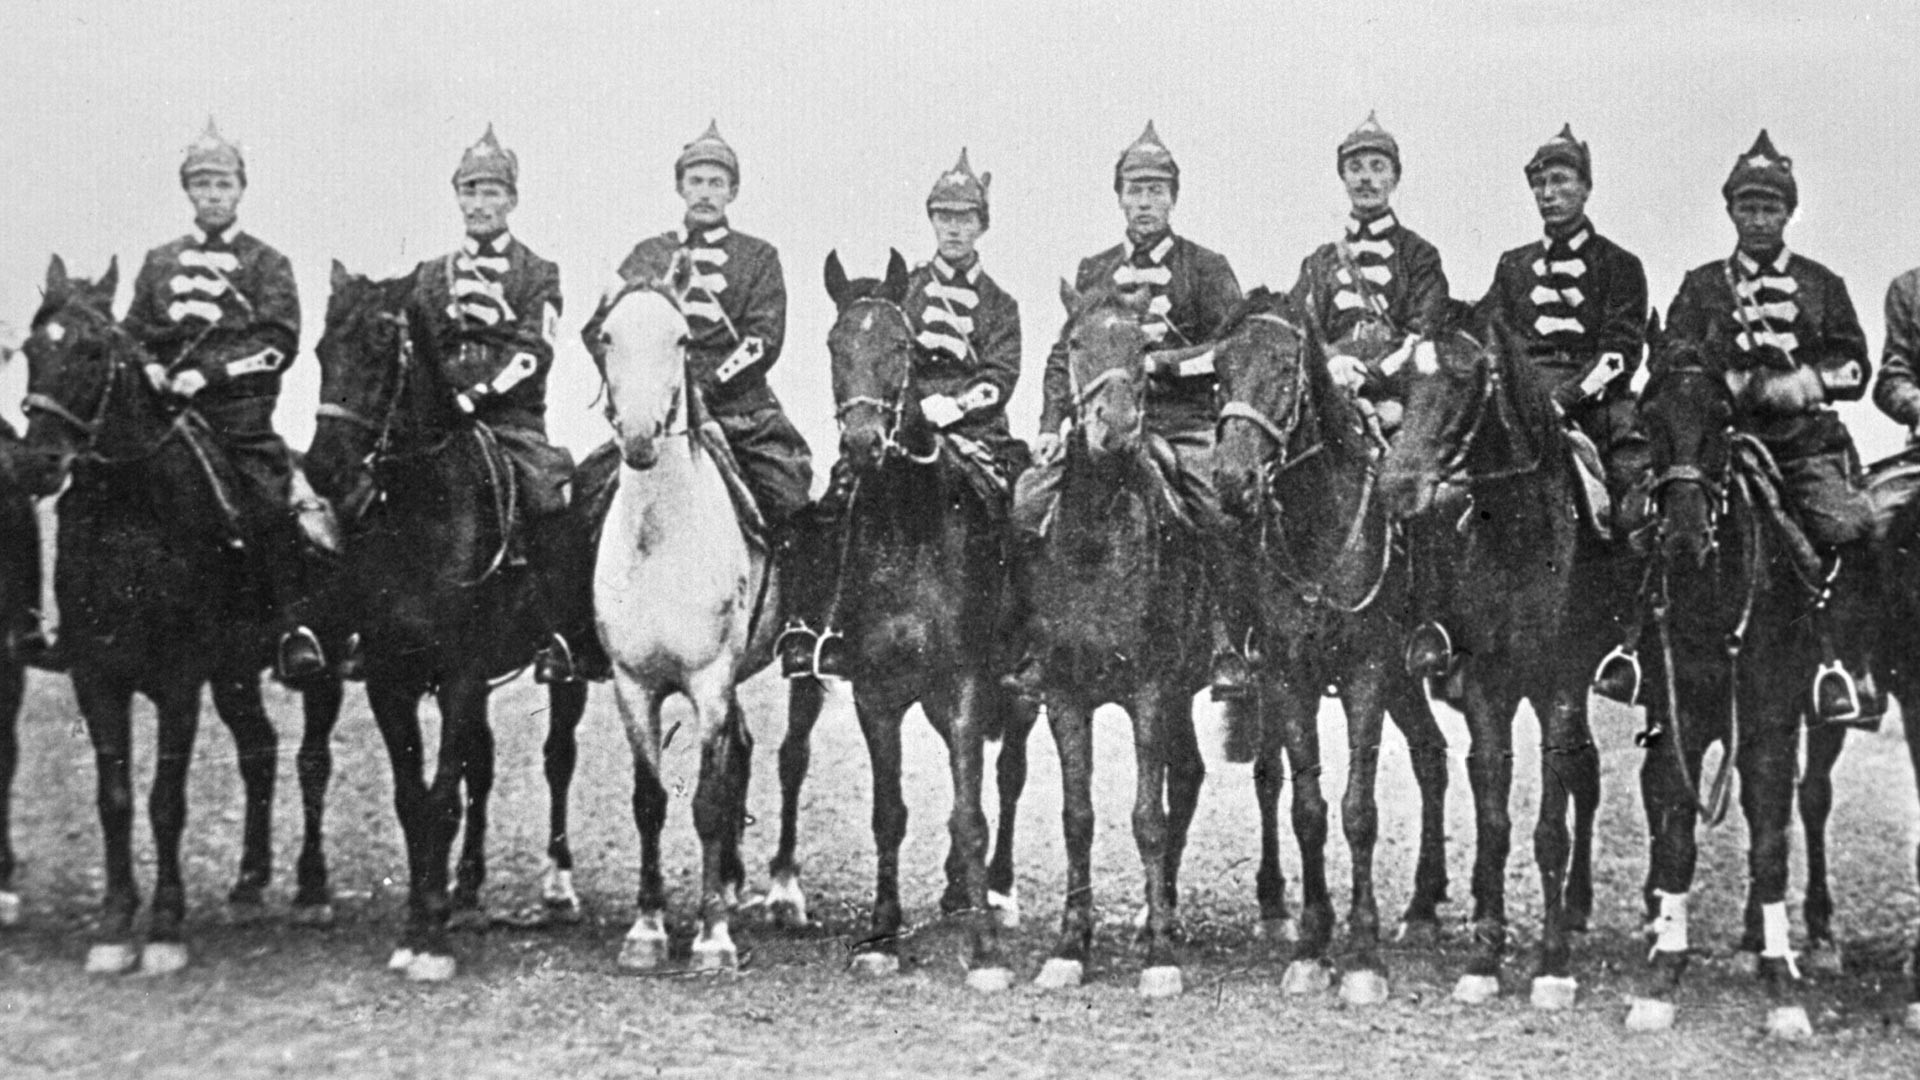 Commanders of the 1st Cavalry Army.